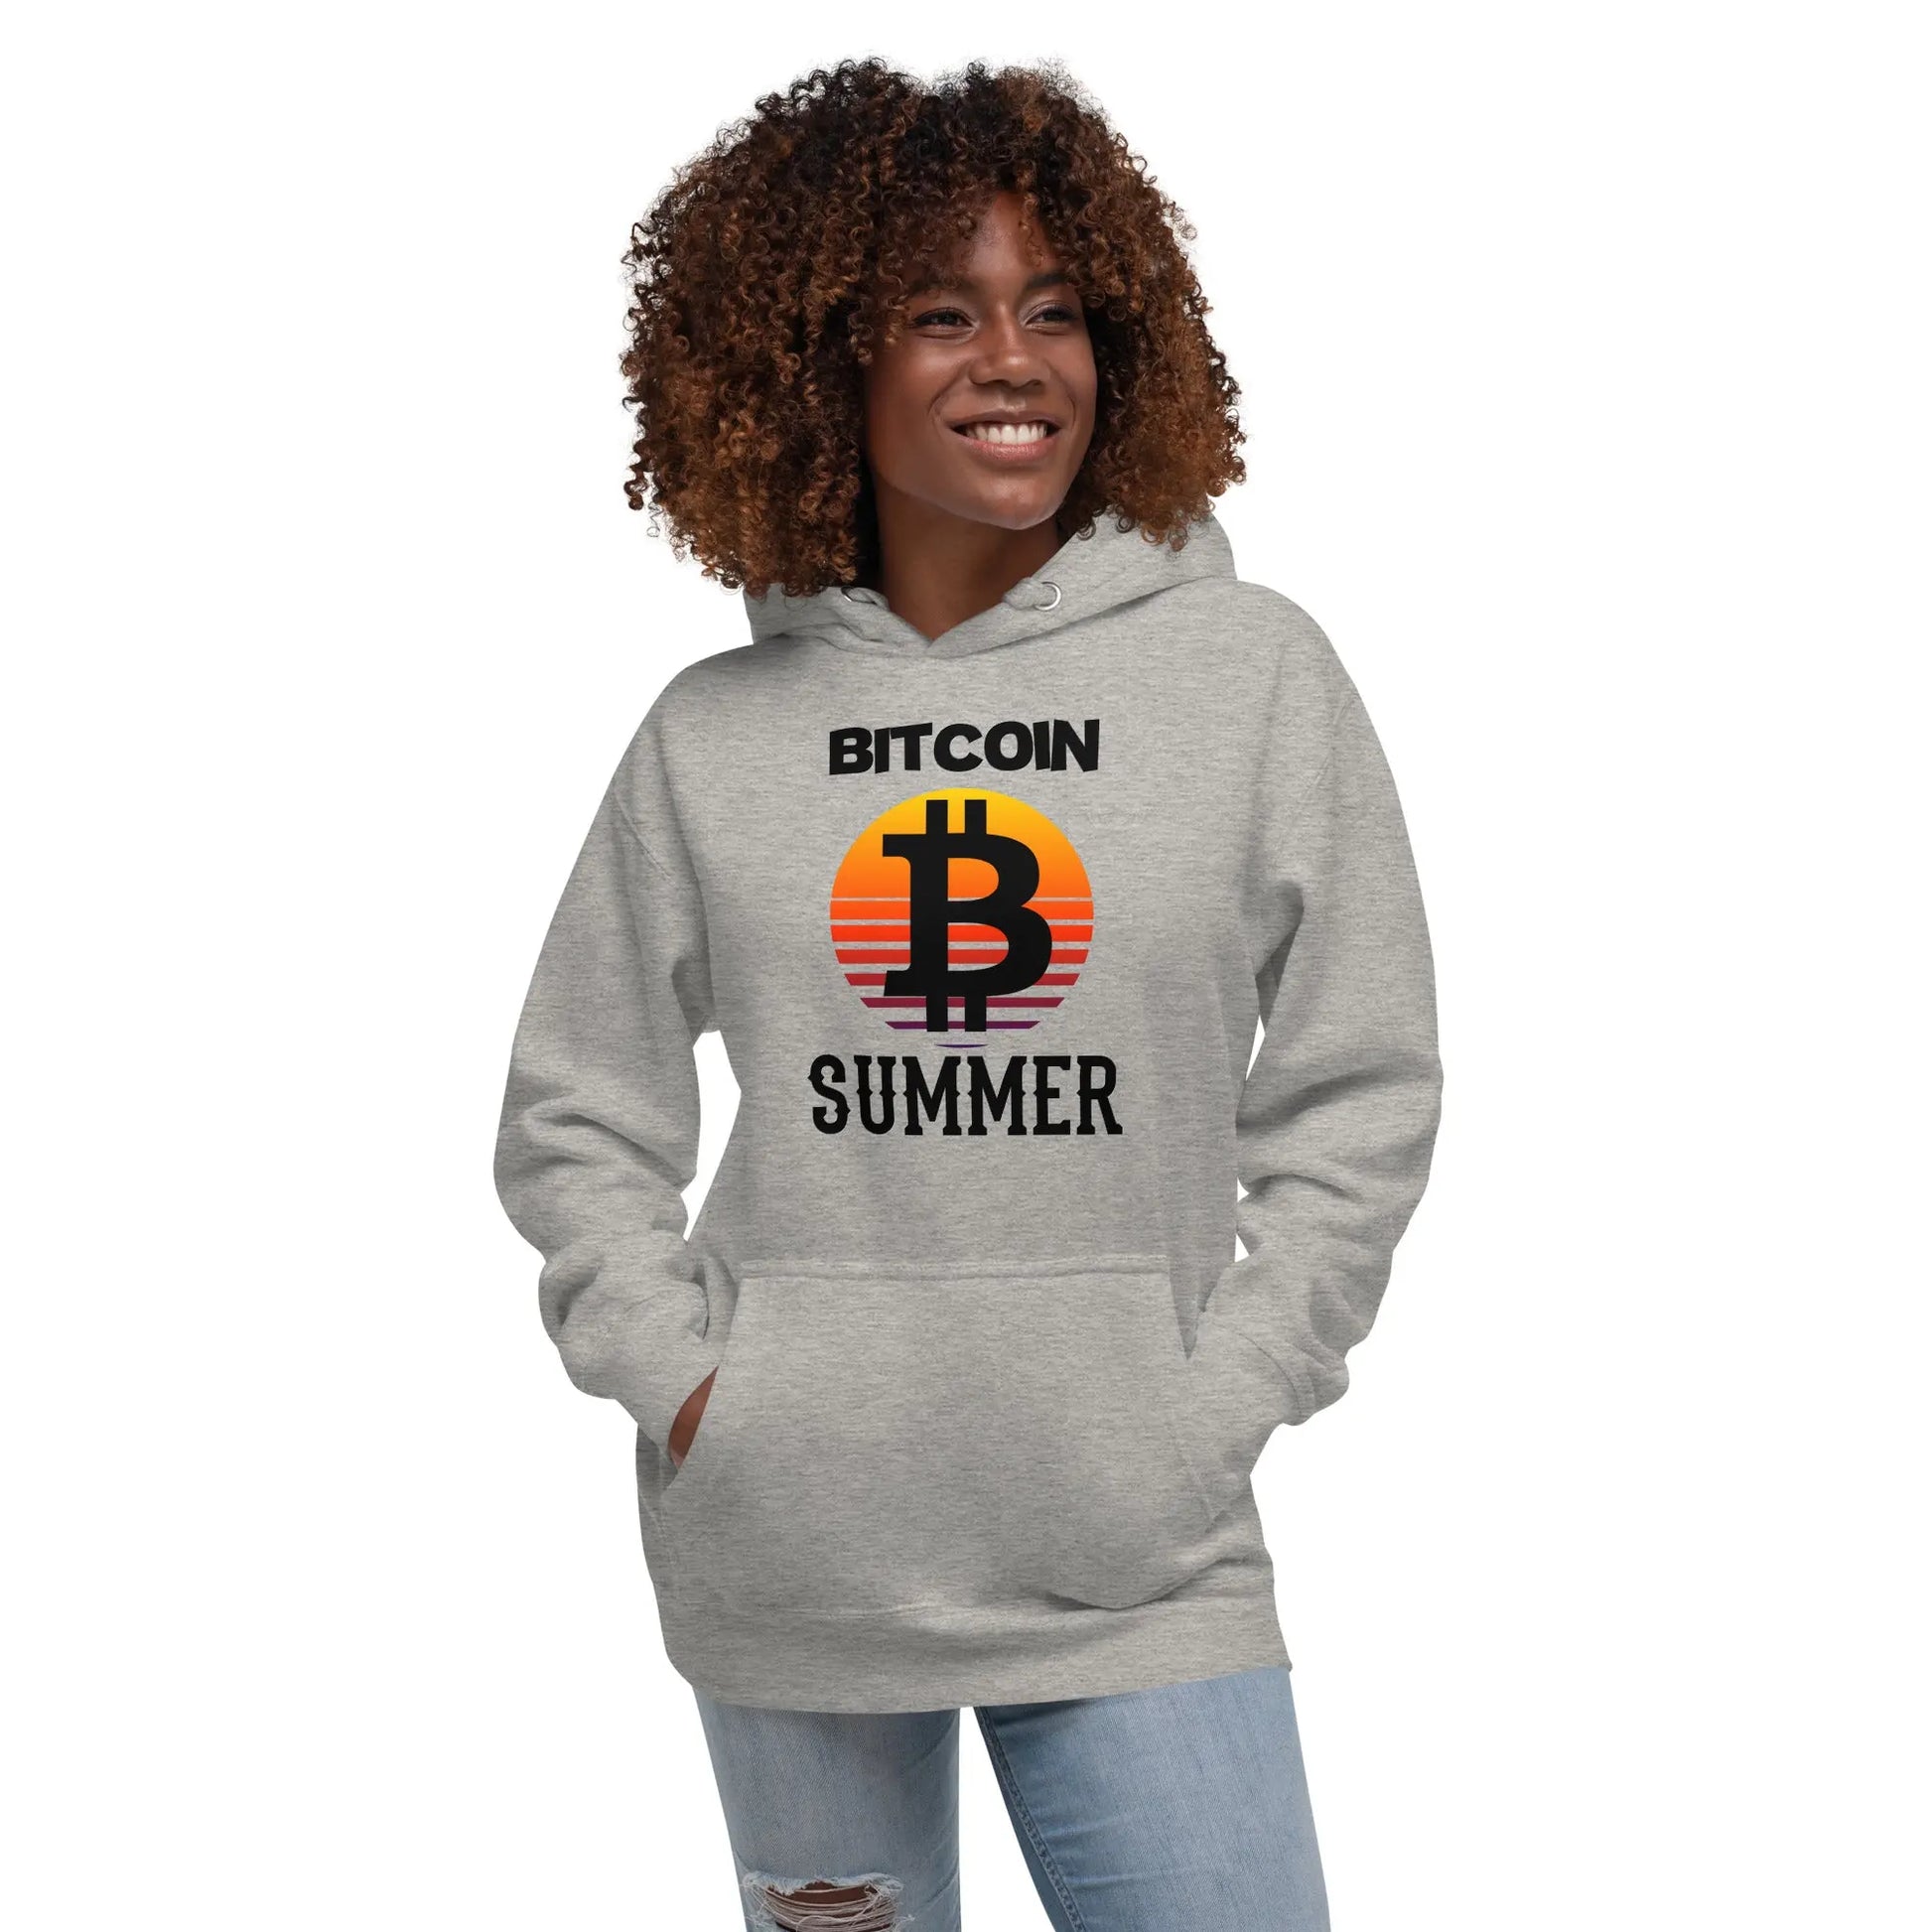 Bitcoin Summer - Premium Unisex Bitcoin Hoodie Grey Color - Store of Value